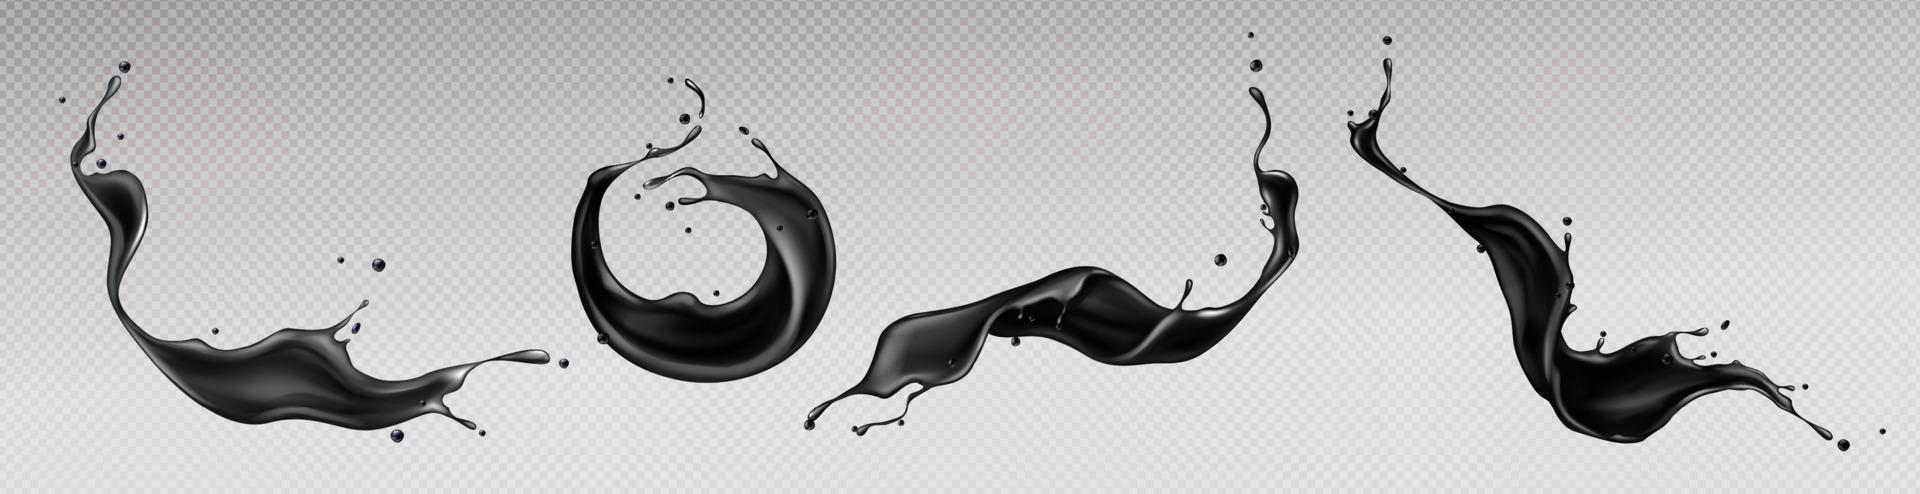 Black liquid splashes, swirl and waves with drops vector